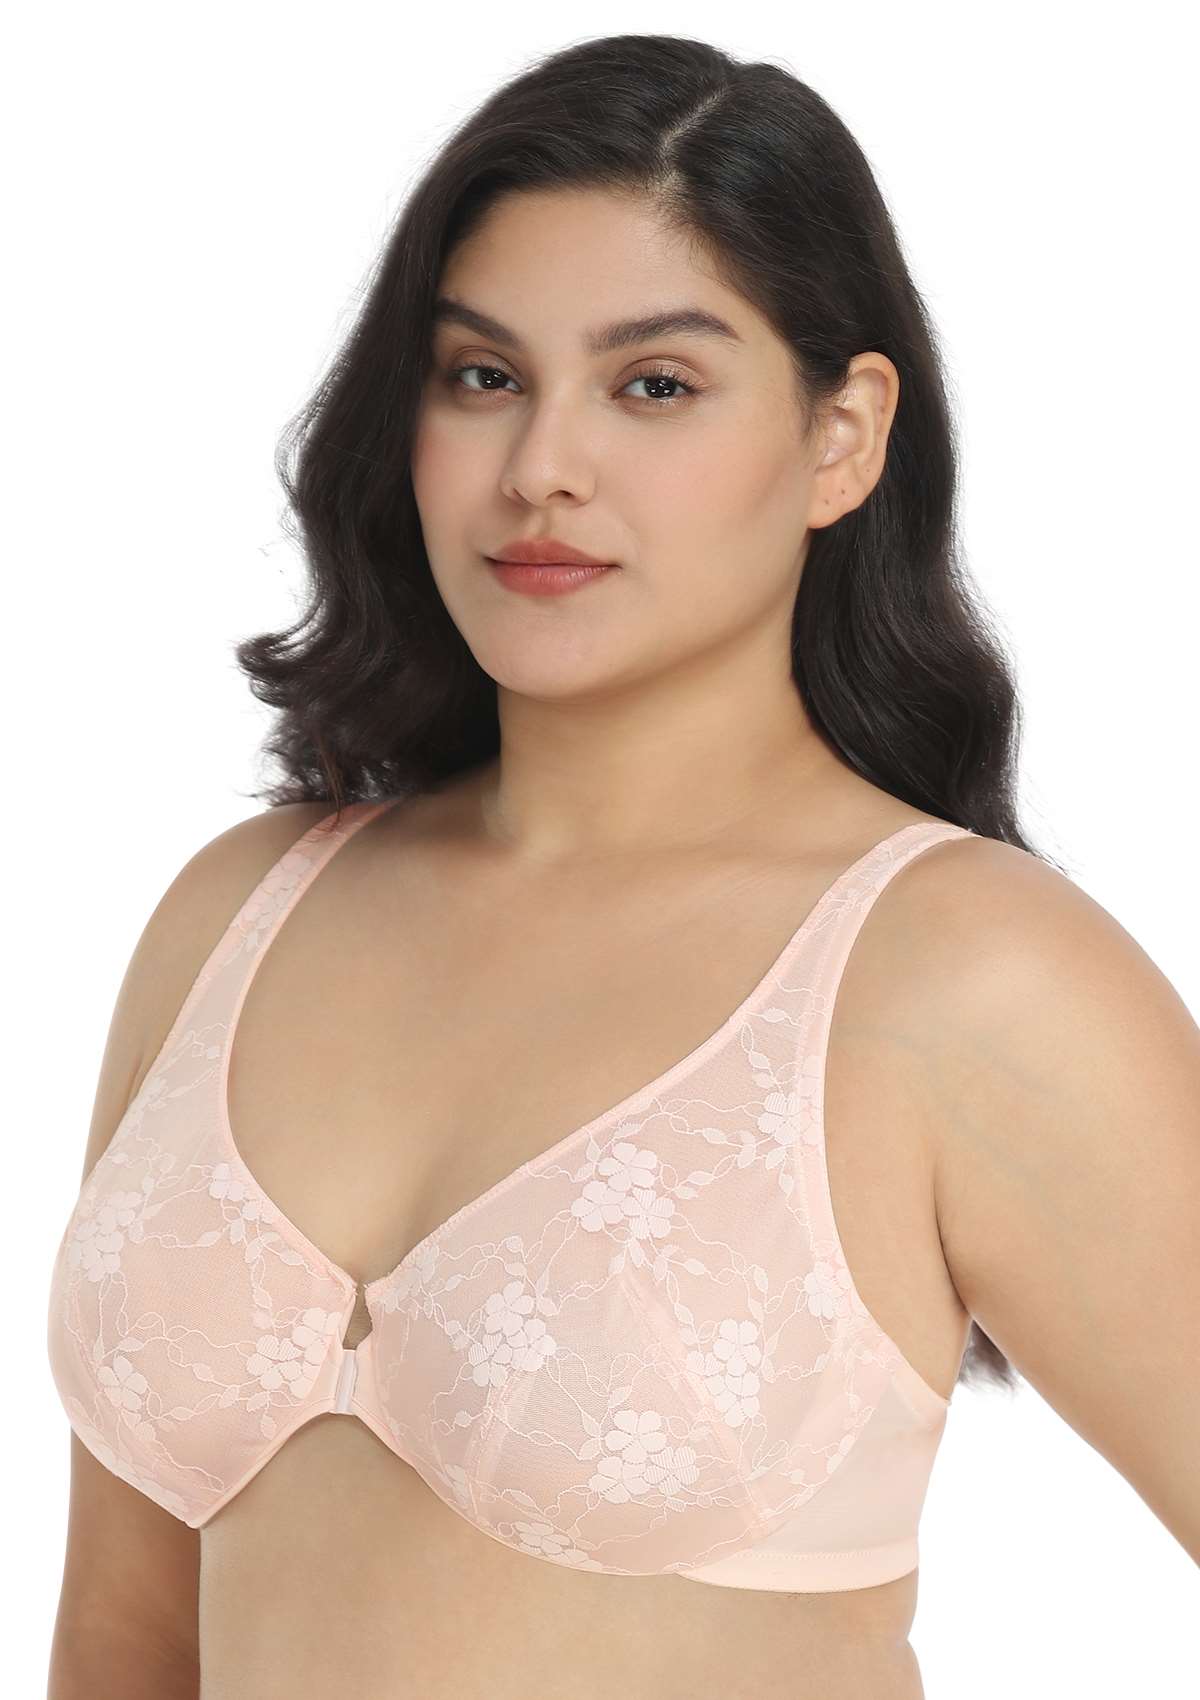 HSIA Spring Romance Front-Close Floral Lace Unlined Full Coverage Bra - White / 34 / D